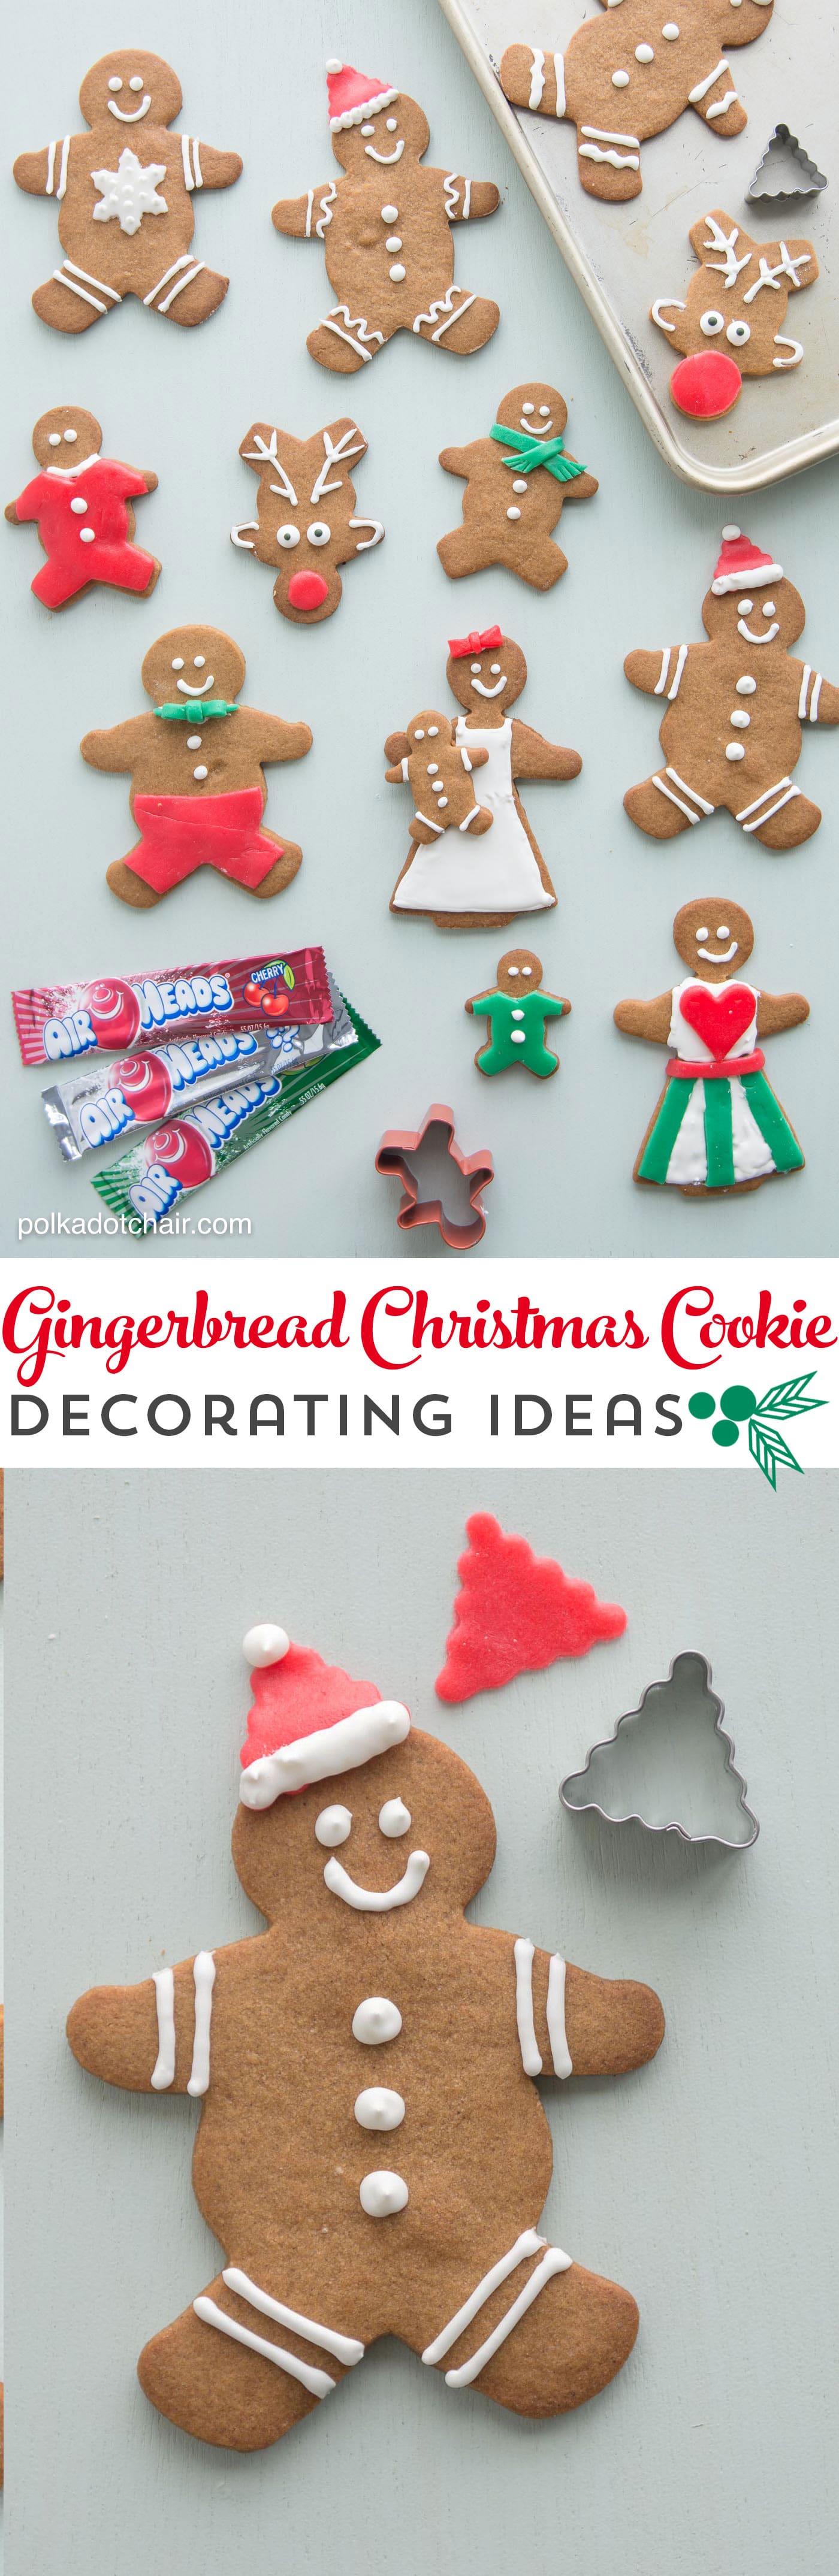 Gingerbread Cookie Decorating Ideas The Polka Dot Chair